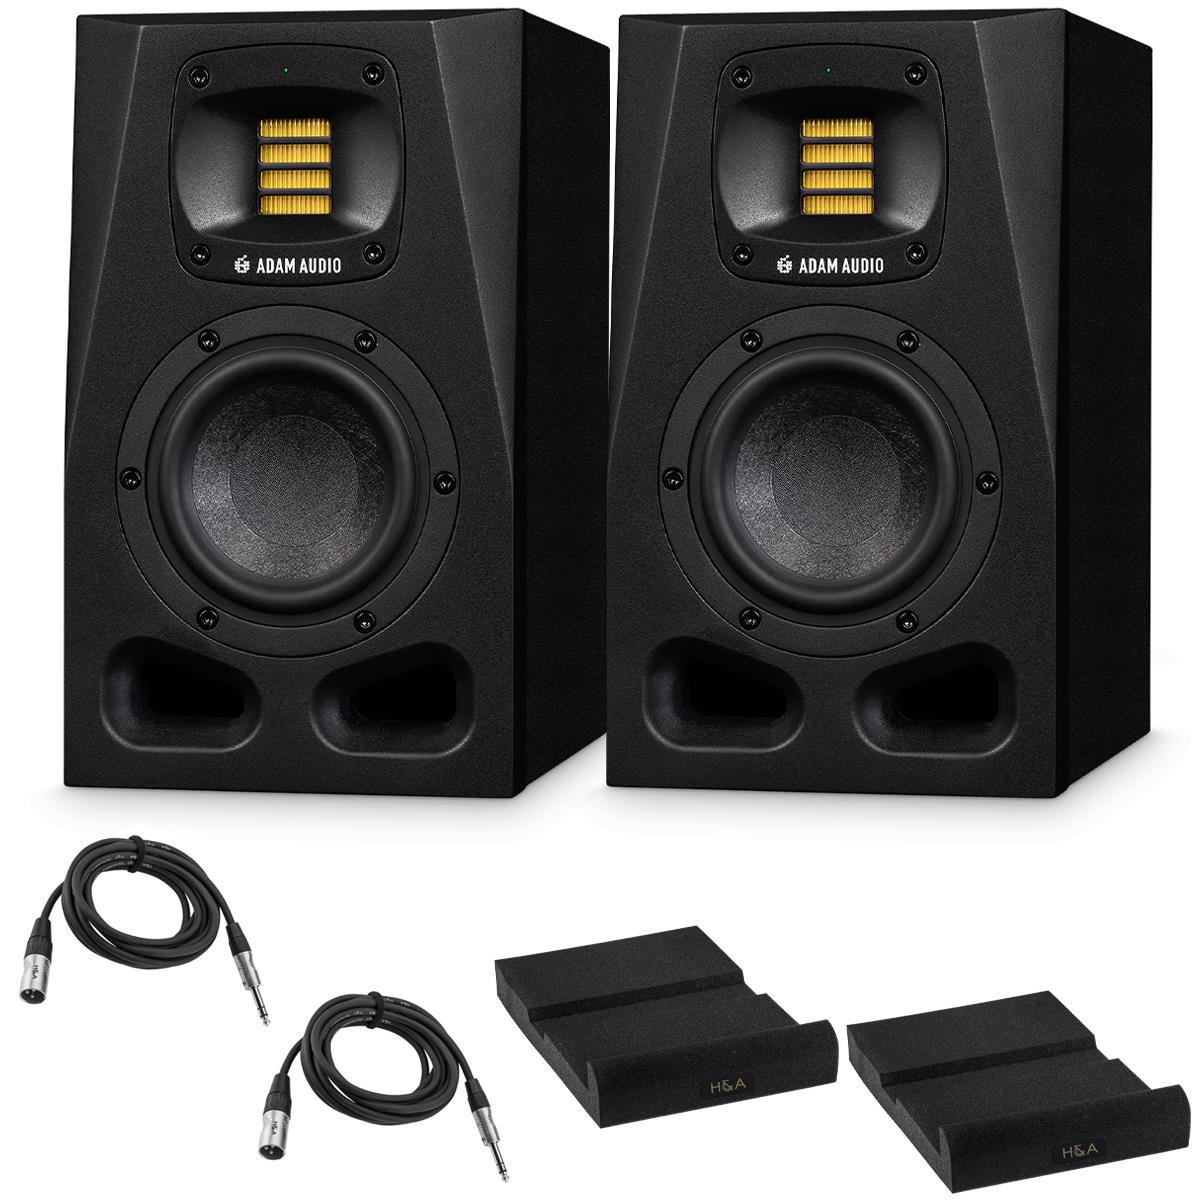 Photos - Speakers Adam Audio 2x A4V Vertical Active Studio Monitor with Isolation Pads & 